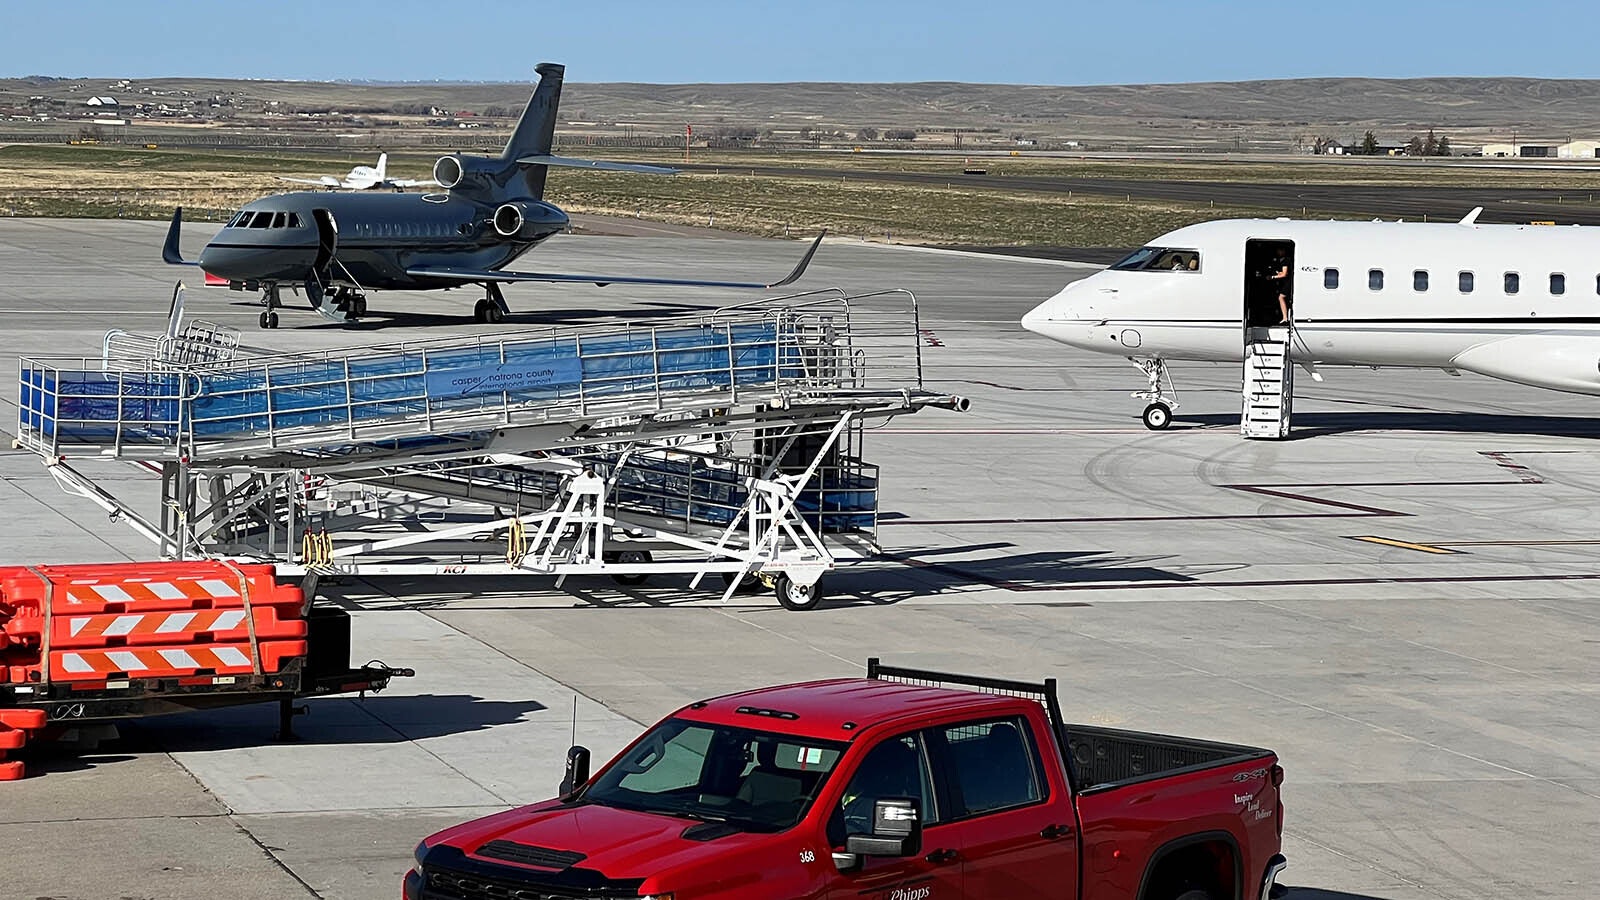 Casper-Natrona County International Airport not only provides commercial airline services for U.S. passengers to airport hubs in the country, it serves more than 500 international charter and private flights through its U.S Customs and Border Protection facility.